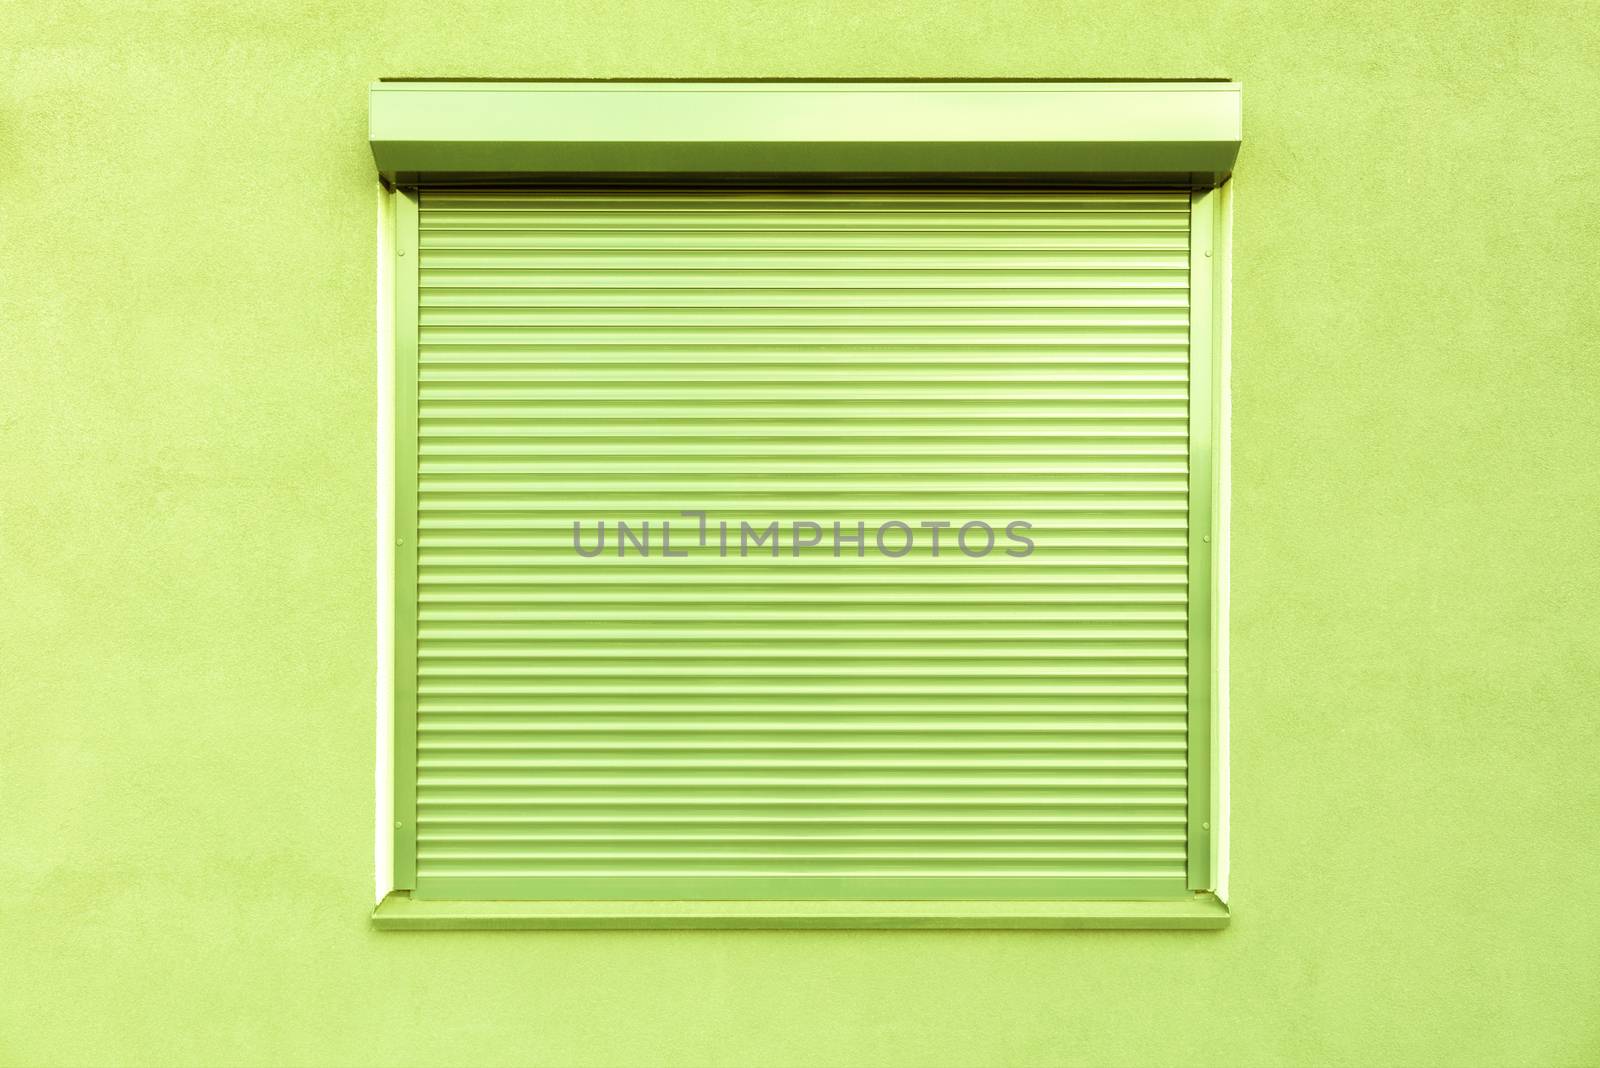 Light green metal blinds on the windows of the facade of the house.